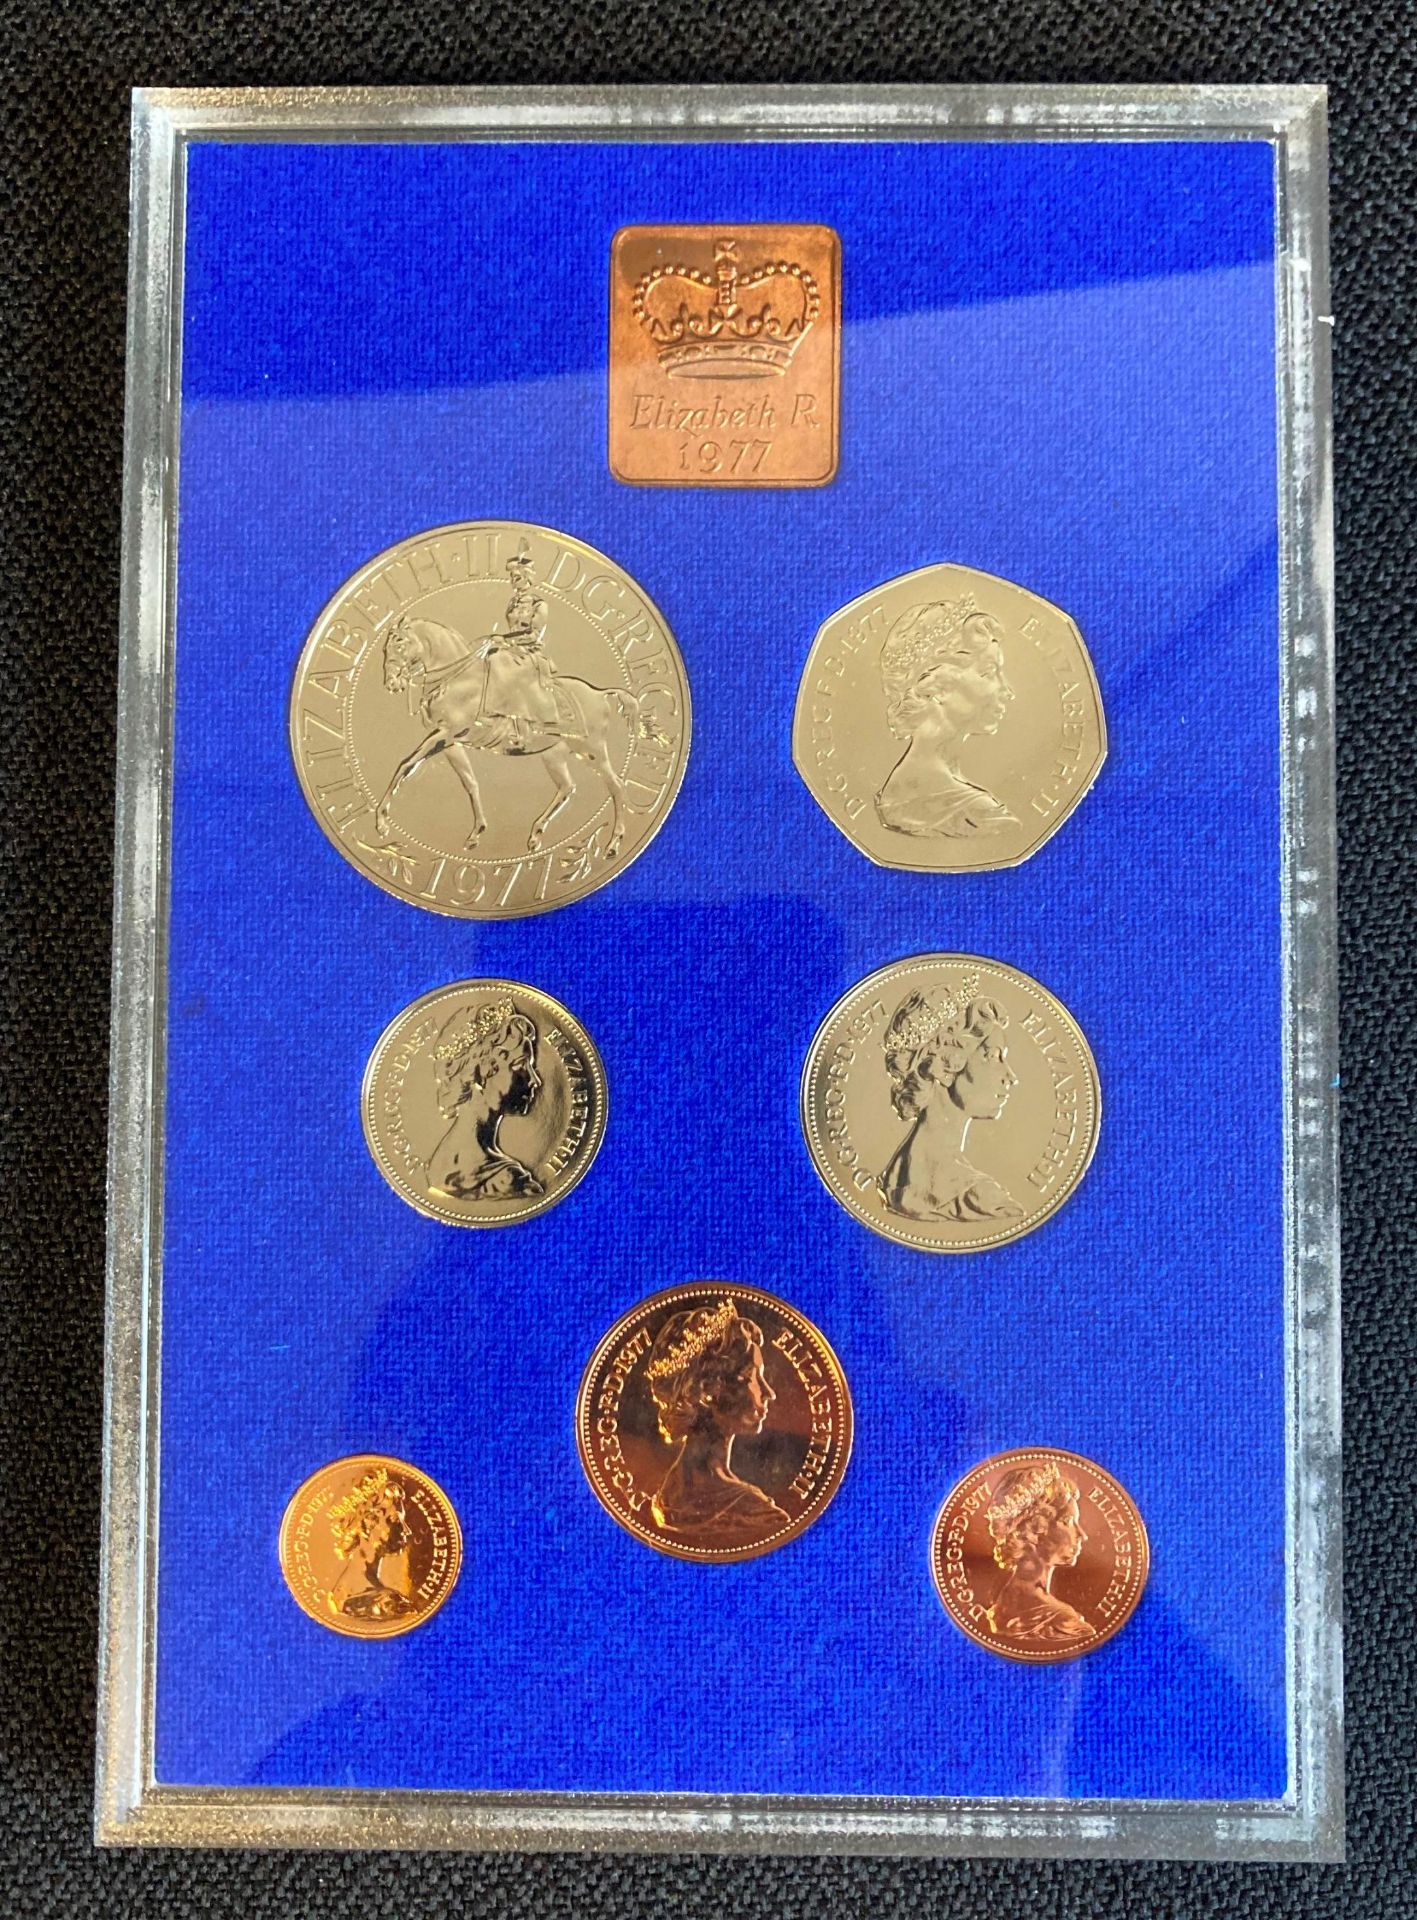 A Royal Mint Coinage of Great Britain and Northern Ireland 1977 proof set, Silver Jubilee edition, - Image 2 of 2